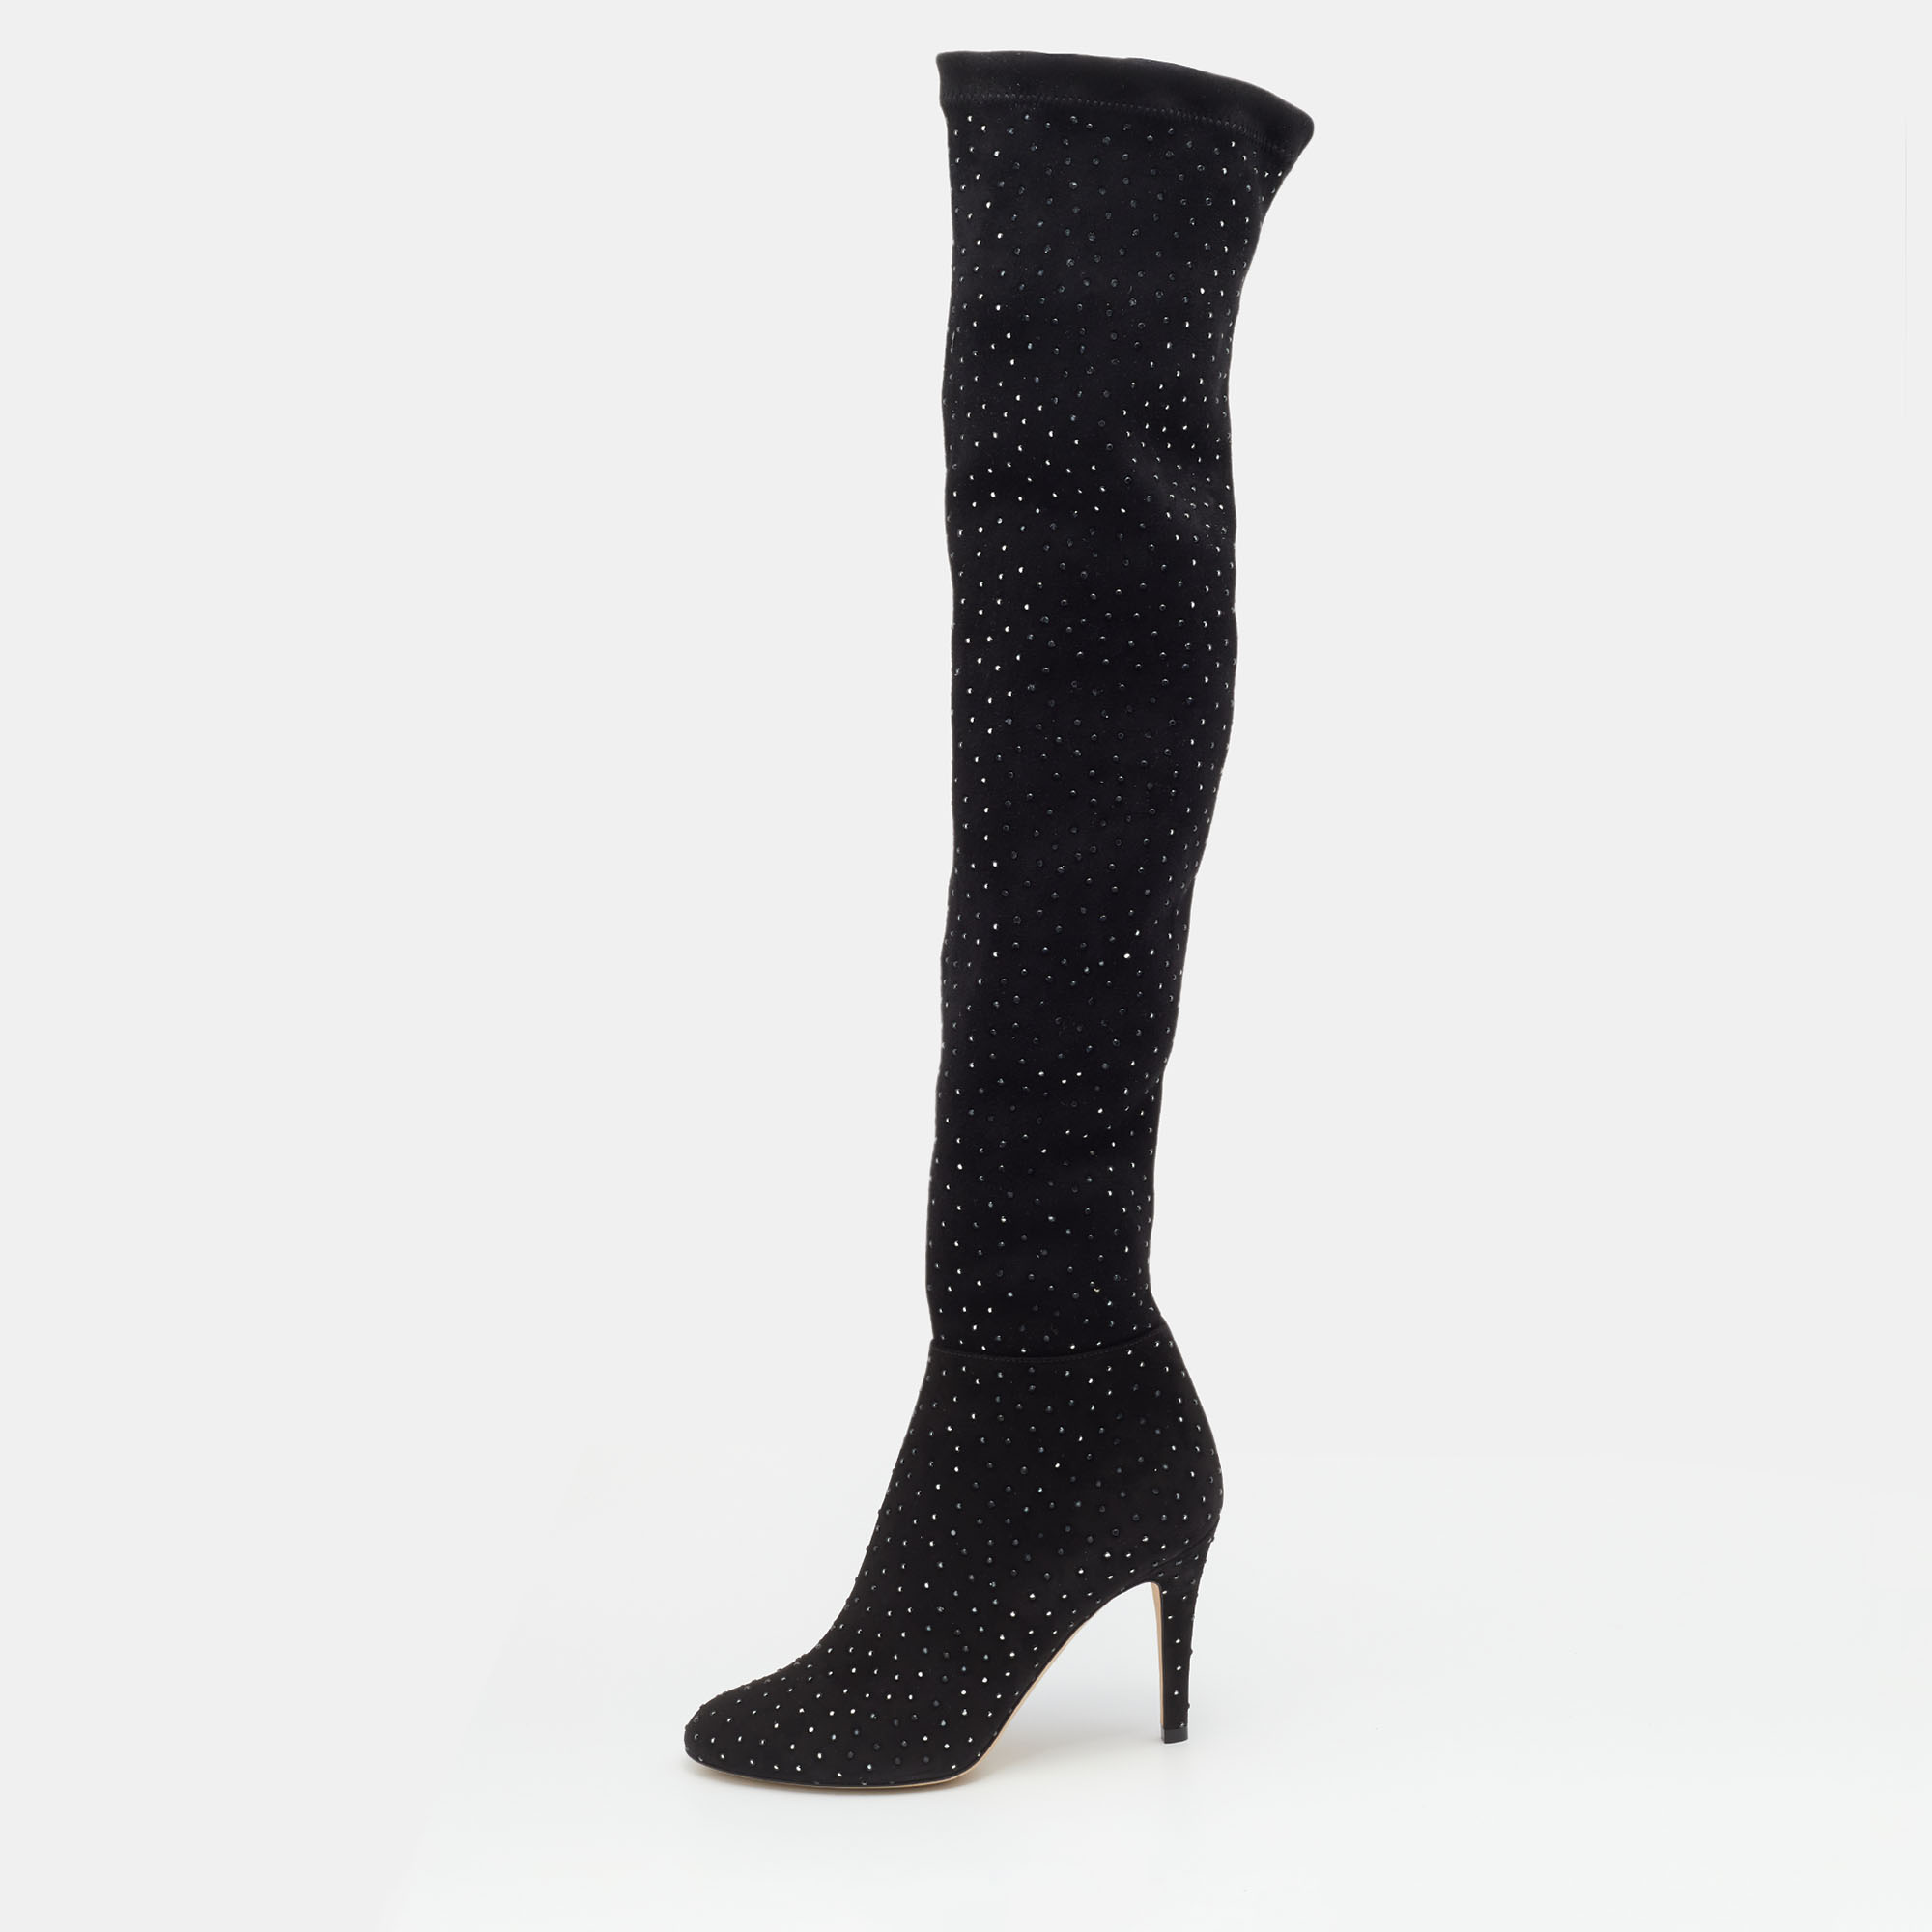 Jimmy Choo brings you this fabulous pair of thigh high boots that will give you confidence and loads of style. The shoes have been crafted from stretch fabric in a classy black shade and styled with embellishments and 9 cm heels.